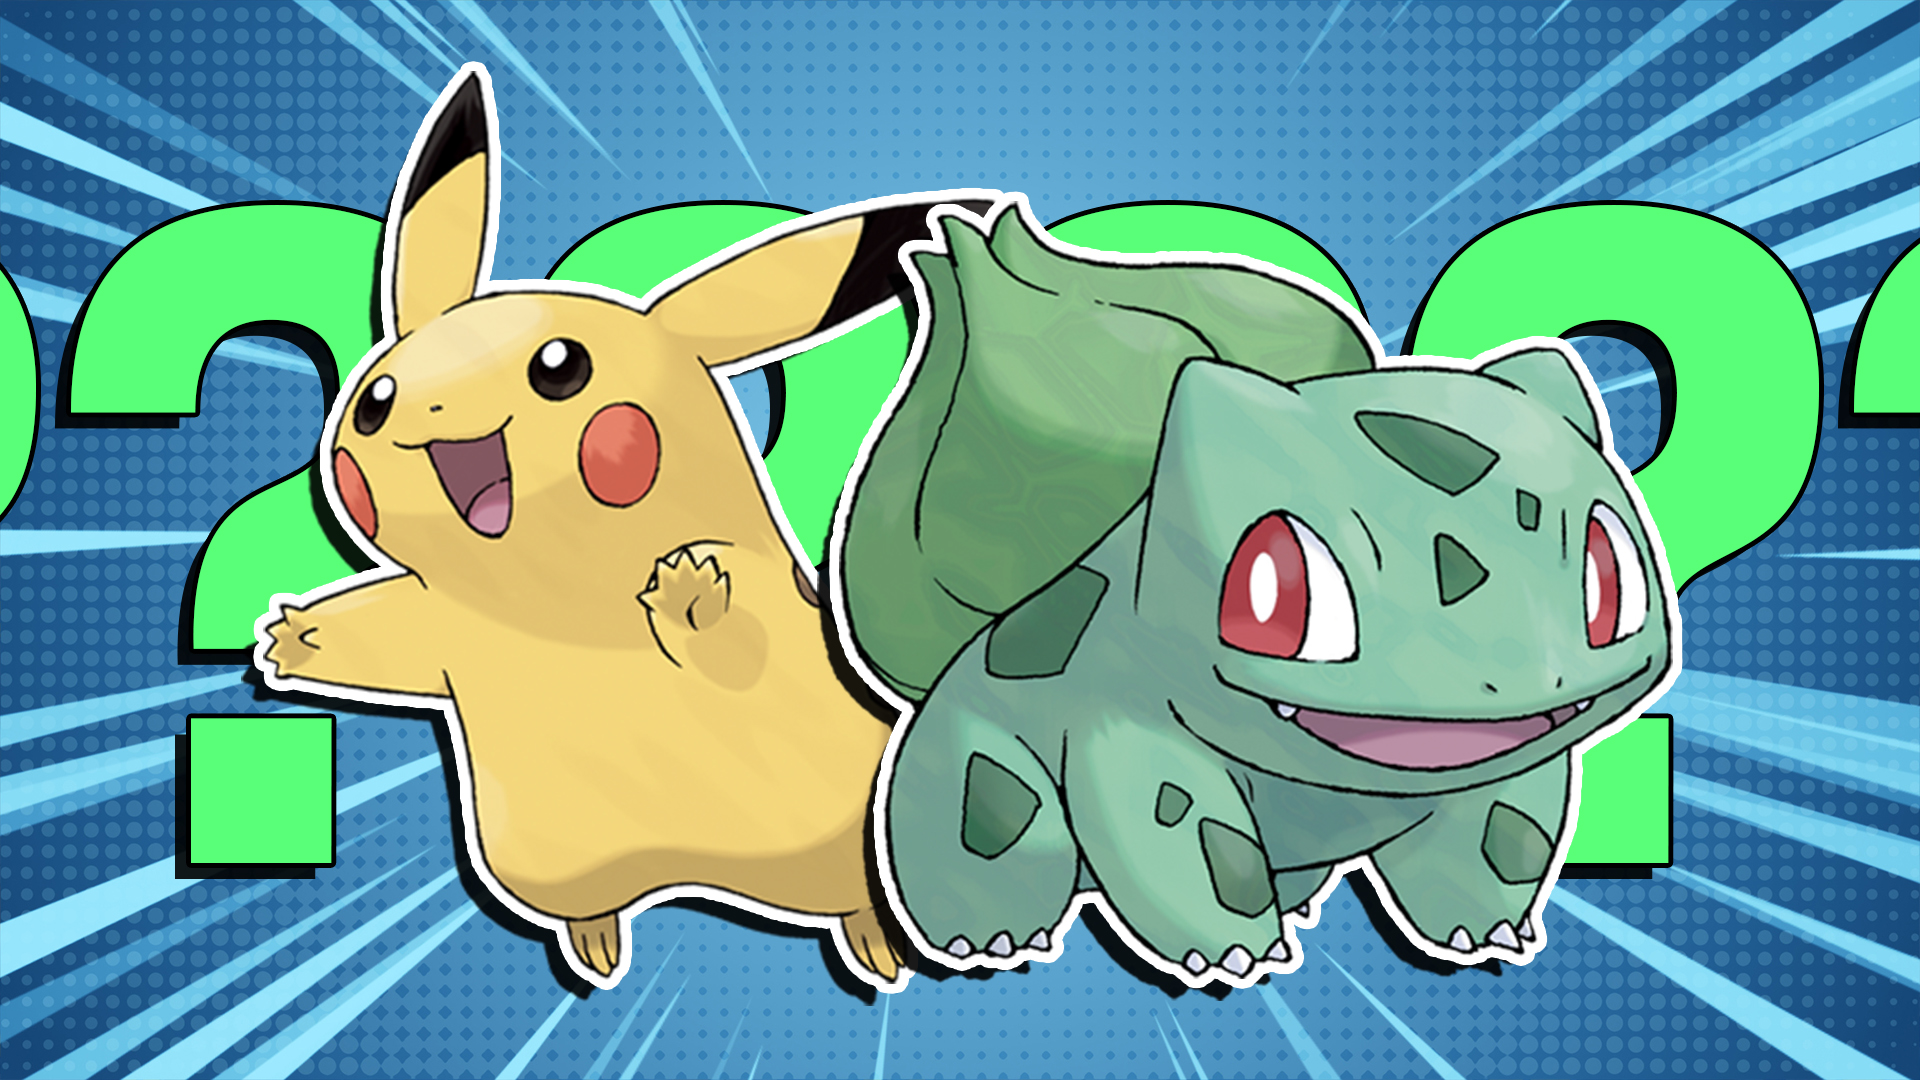 The Ultimate “Who's That Pokemon?” Quiz